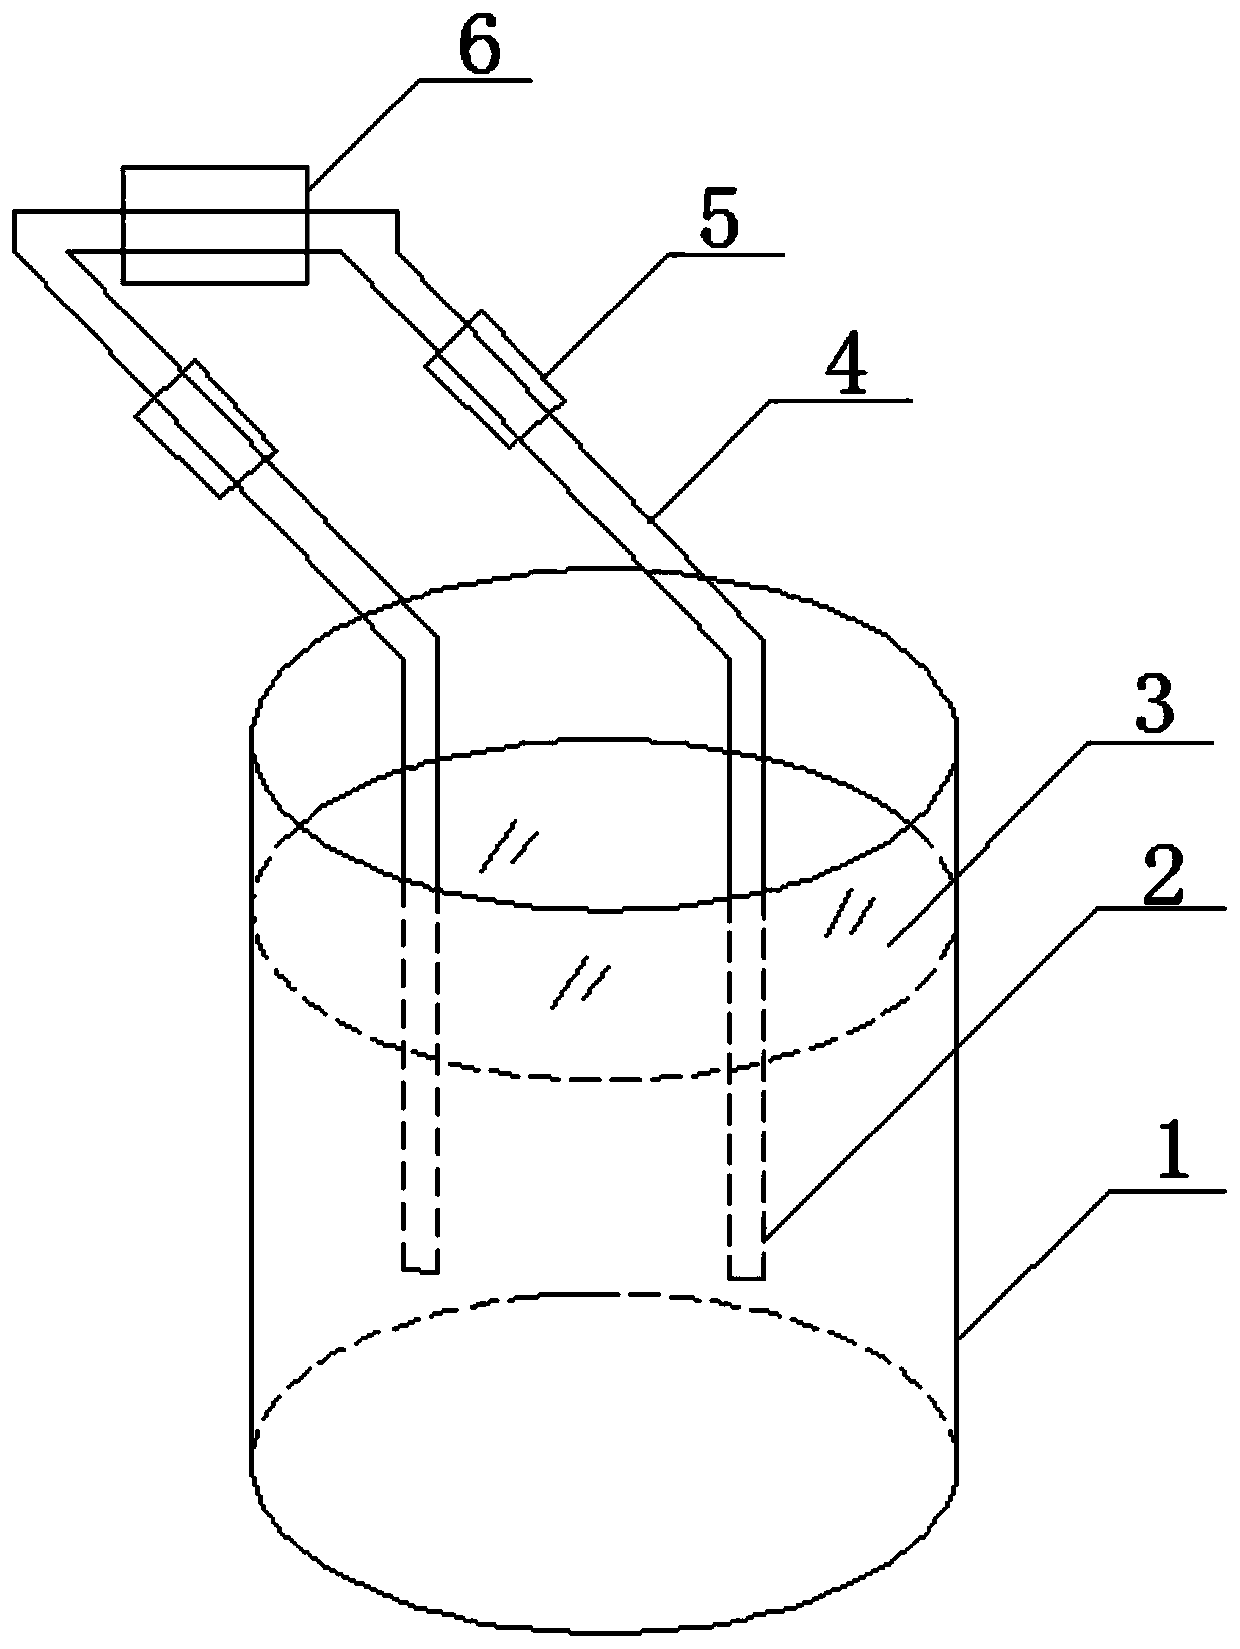 A method of removing nitriding salt bath slag by using the principle of magnetic adsorption